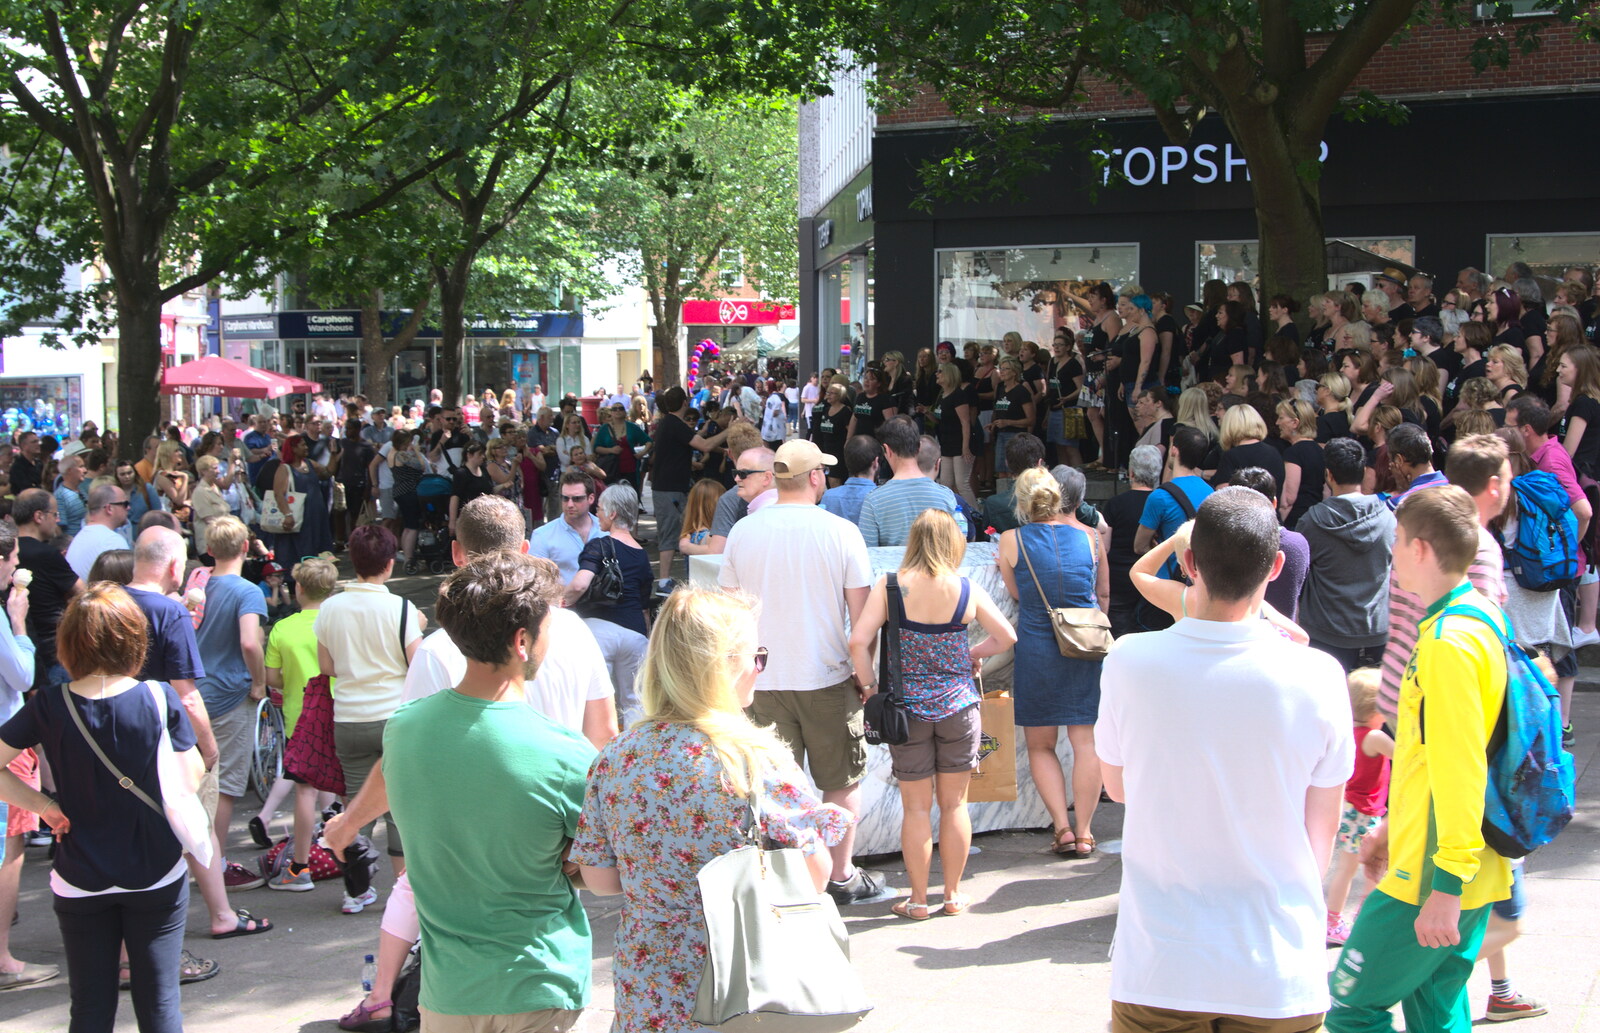 A view of the crowds from Isobel's Choral Flash Mob, Norwich, Norfolk - 17th June 2017